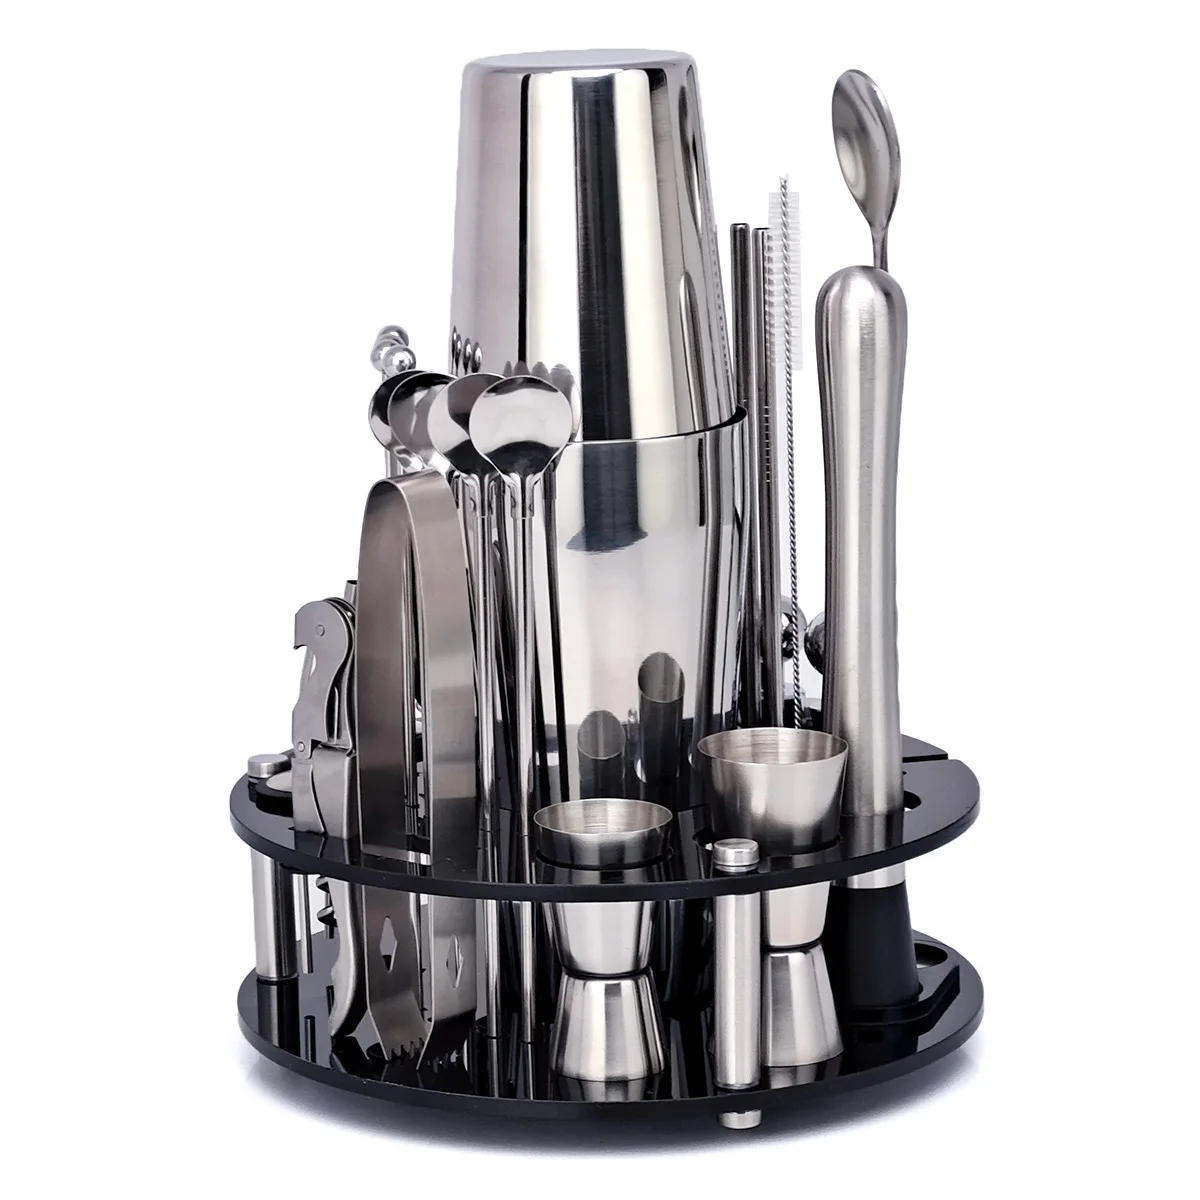 750ml+600ml Stainless Steel Bar Cocktail Shaker Set Barware Tools Shaker Sets Rotating Stand Whisky Beer Drinkware  Accessories